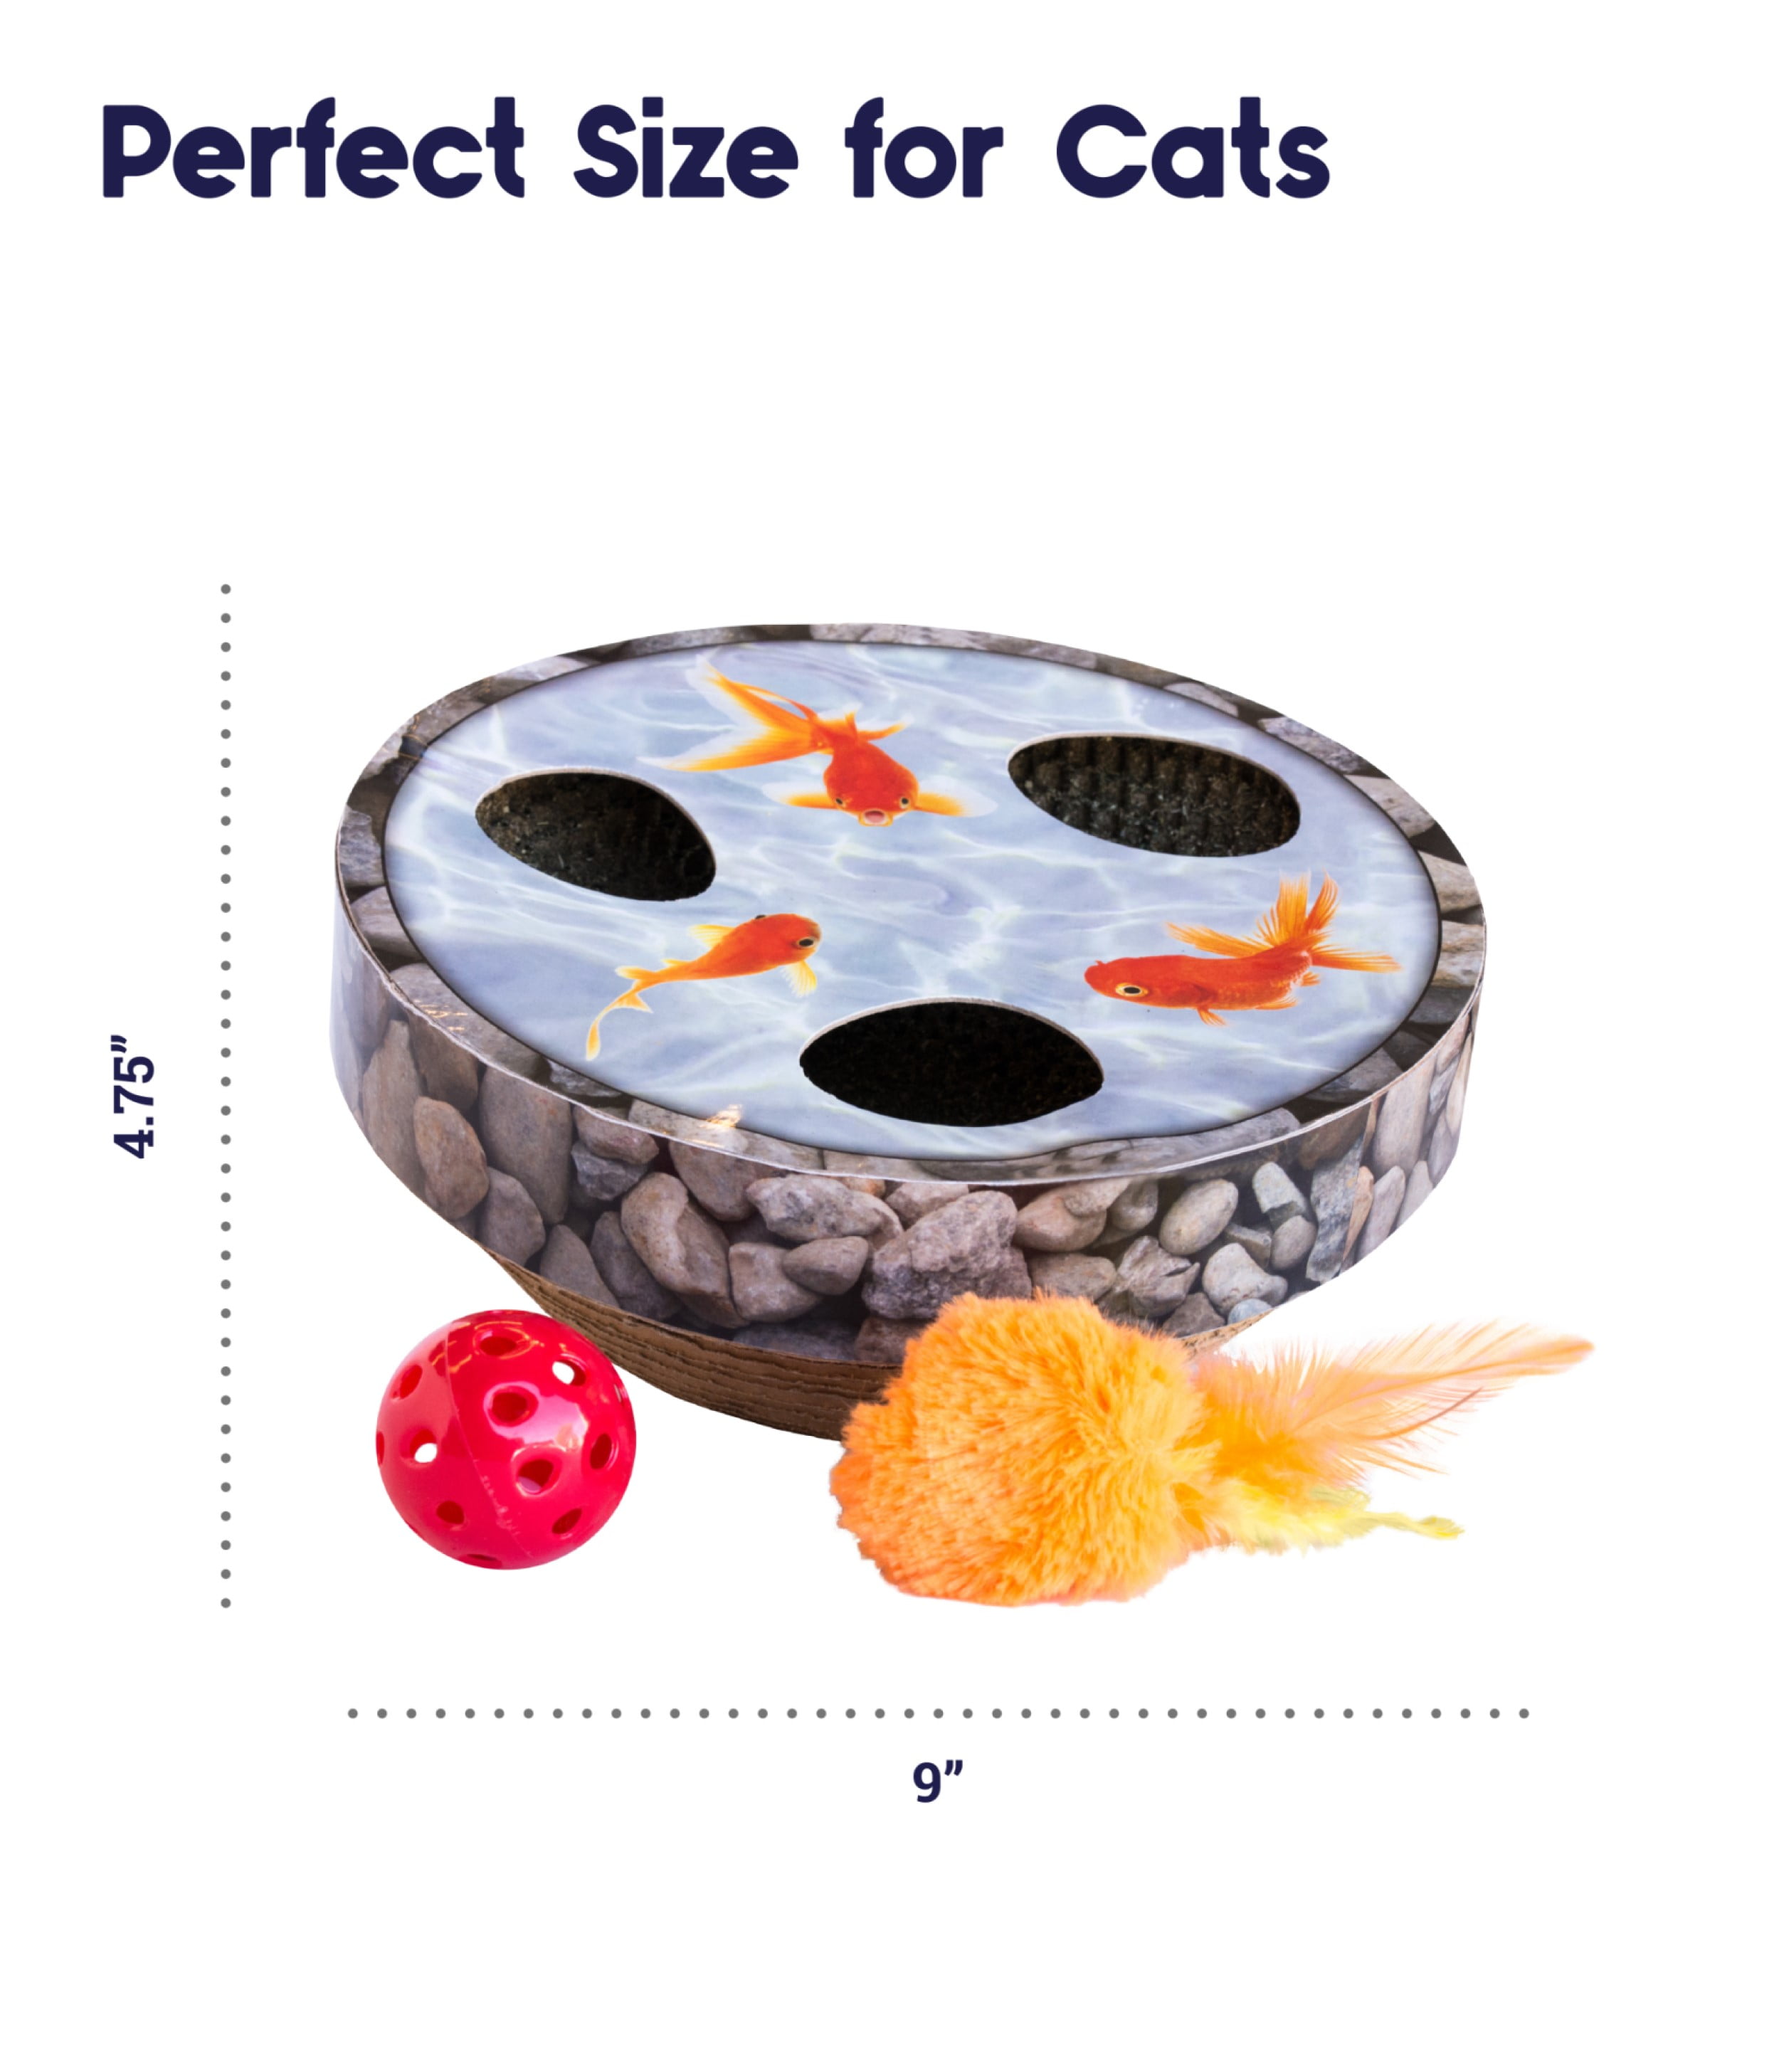 Nina Ottosson Melon Madness Puzzle & Play Cat Treat Puzzle from Petstages  Review! 